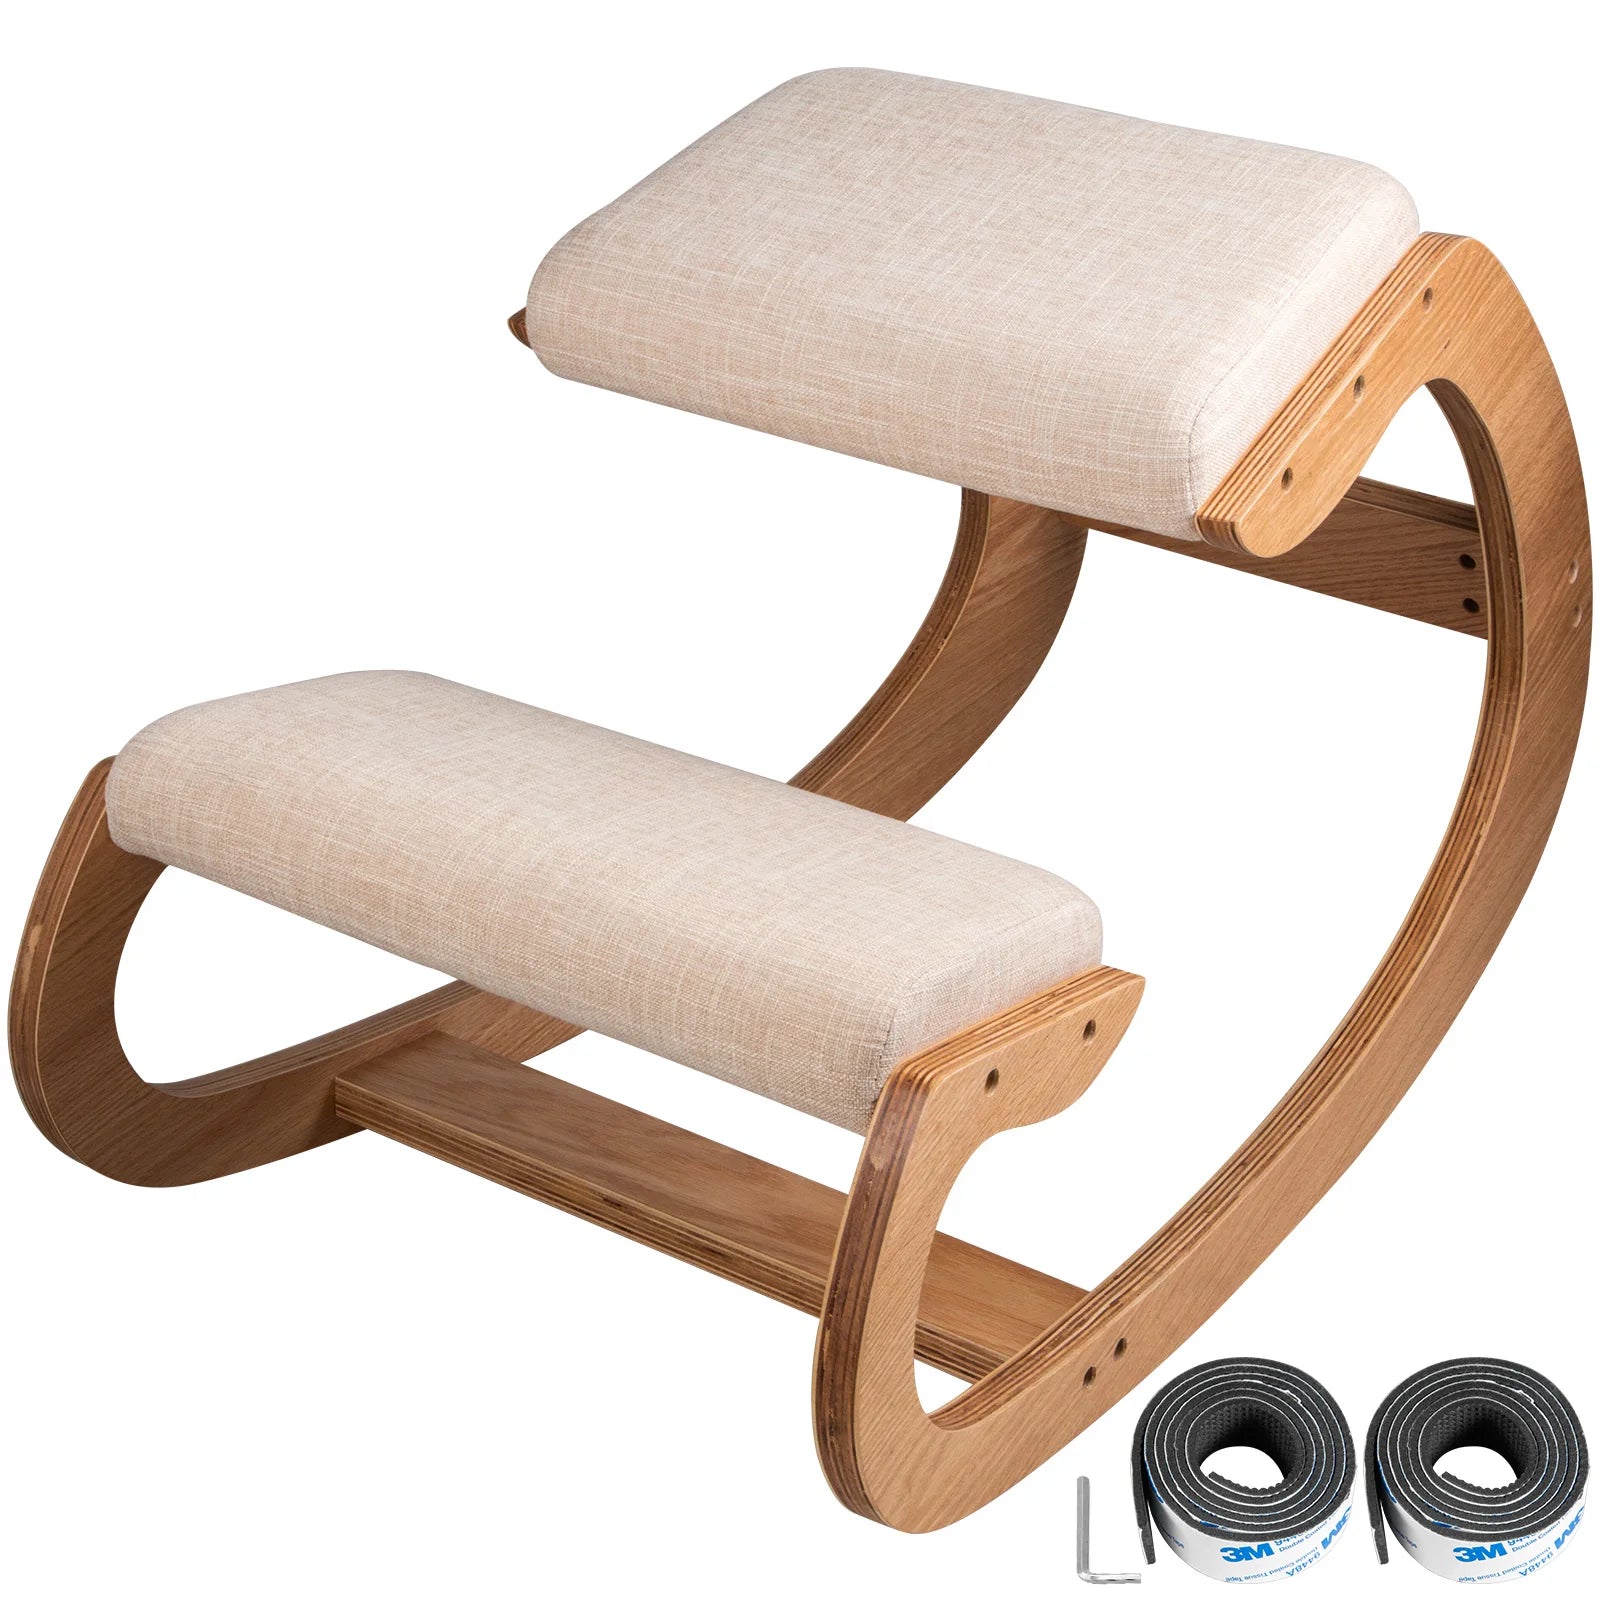 An ergonomic kneeling chair made of wood designed to support efficient postures and counteract the adverse effects of prolonged sitting. The chair lacks handrails and wheels, providing spaciousness and stability. Its large aimed to encourage correct posture and reduce back pain, knee cushion for adequate knee rest and controlled movement. Ideal for commercial use and improving workspace health and productivity.